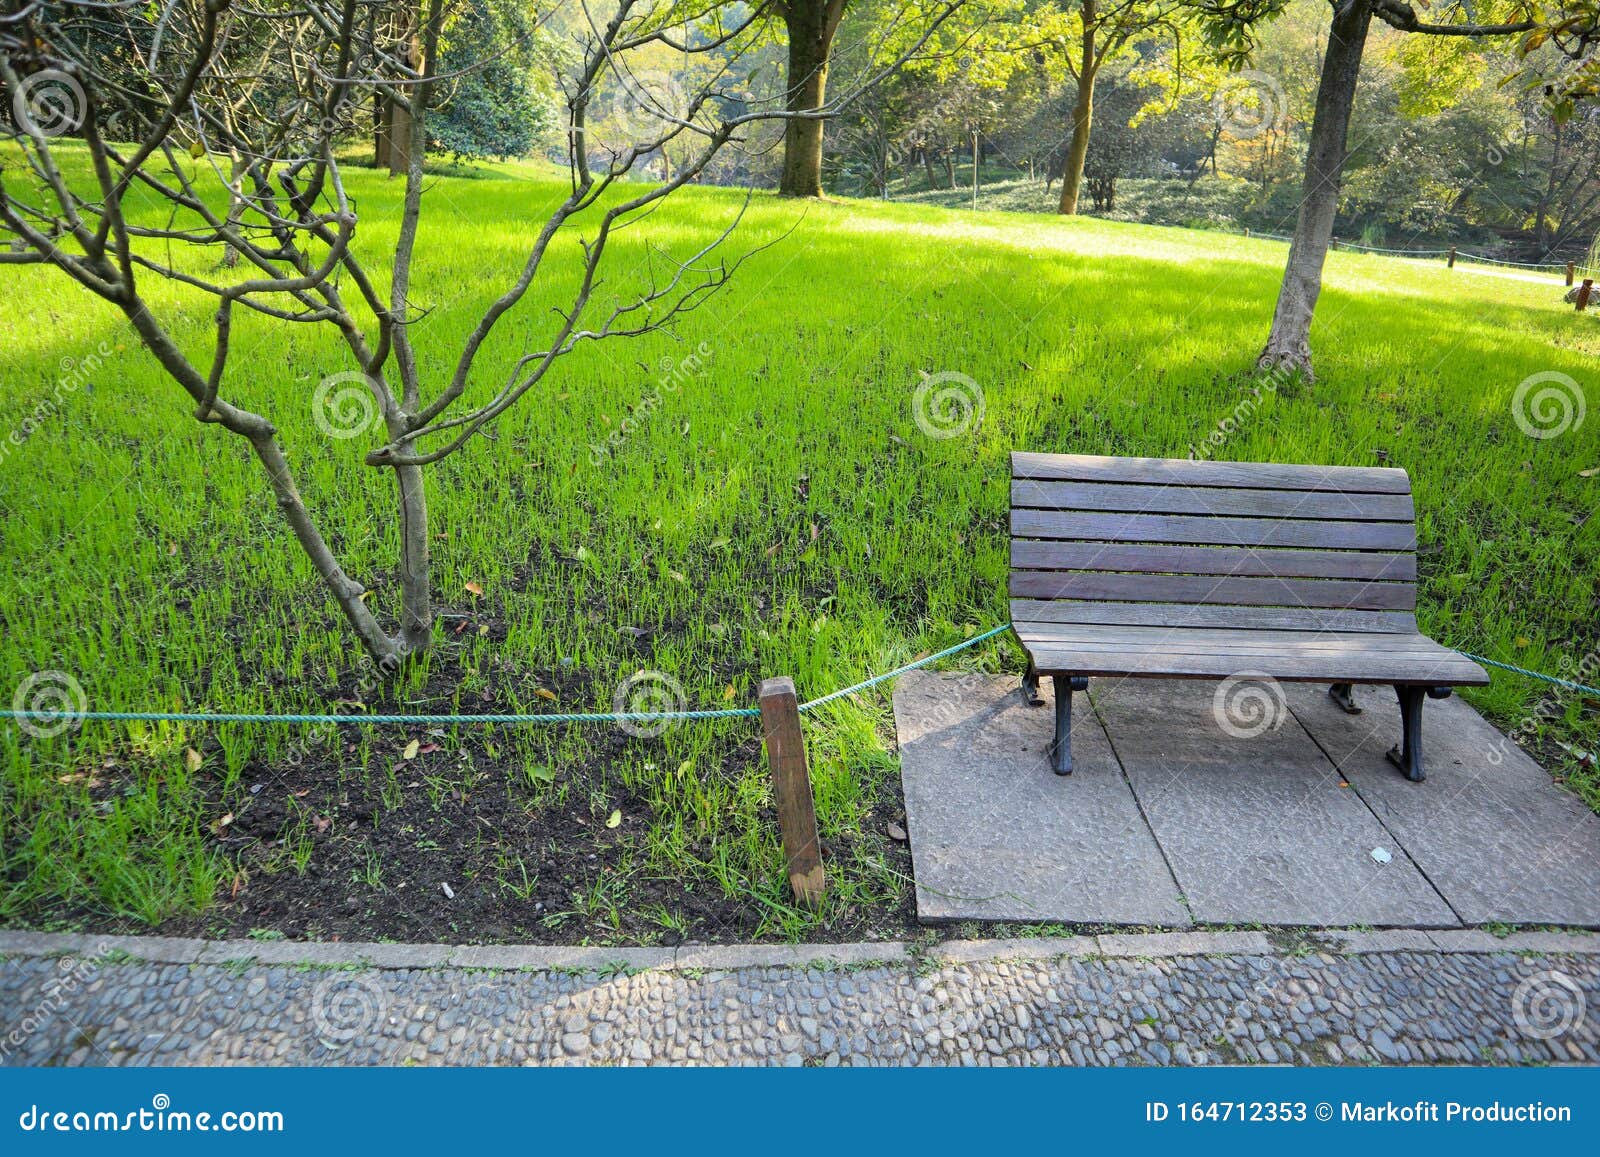 Park Bench In Amazing Green Park Stock Image Image Of Relax